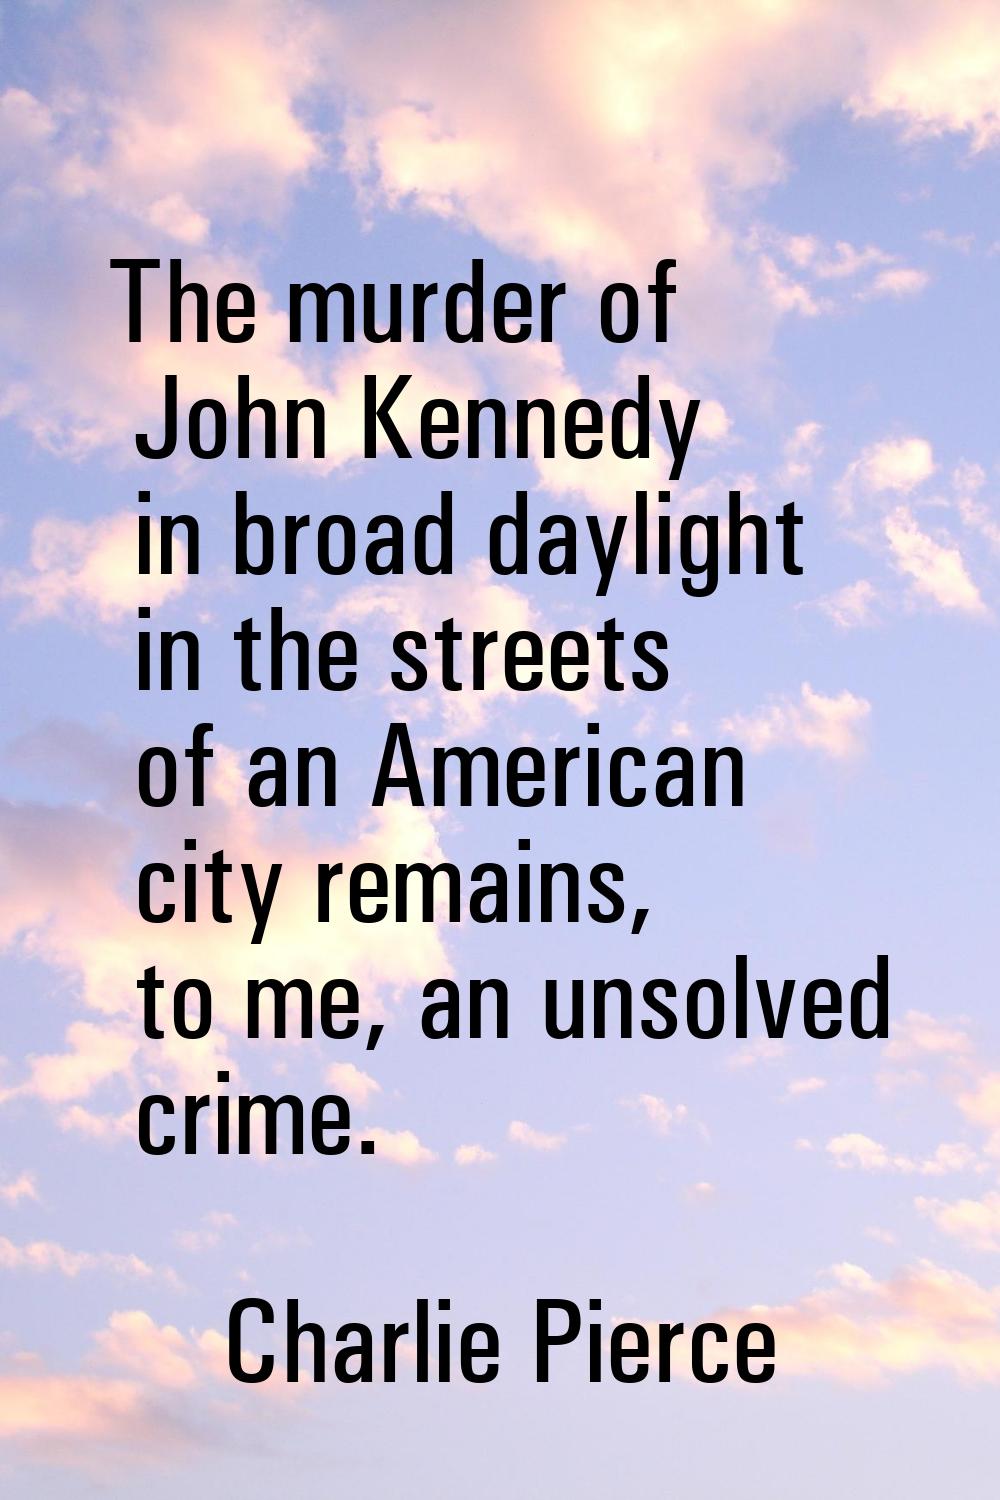 The murder of John Kennedy in broad daylight in the streets of an American city remains, to me, an 